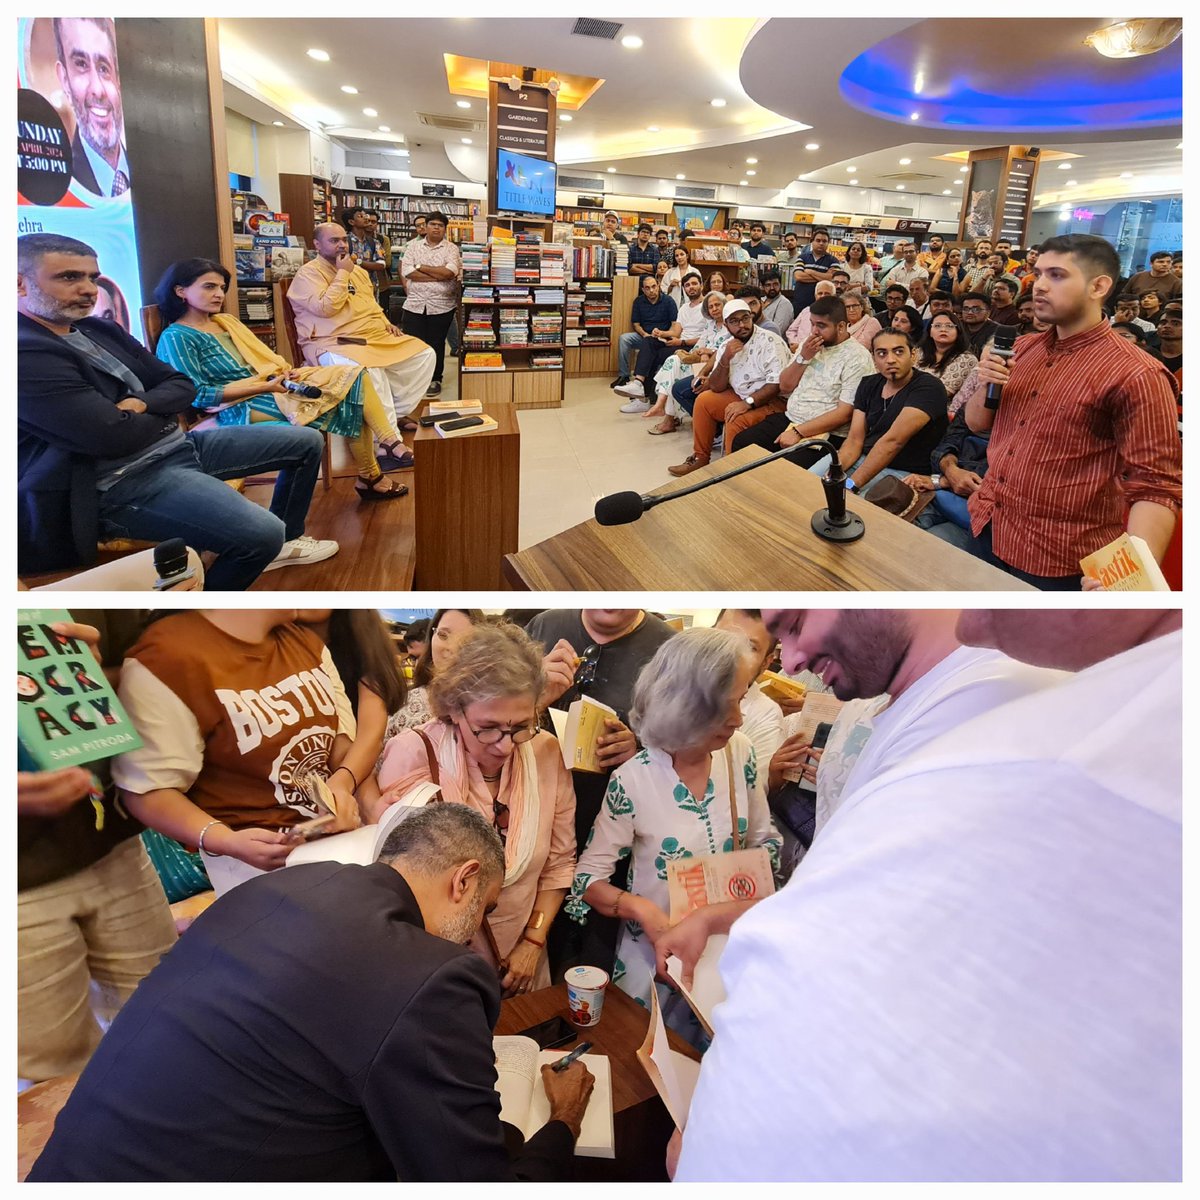 Book Launch: 'Nastik: Why I Am Not an Atheist' by author @kushal_mehra, in discussion with @6amiji @harshmadhusudan @Iyervval. Packed venue, very perceptive discussion followed by audience Q&A, and all copies sold out..!! Get your copy here: amzn.in/d/5o3Yt62